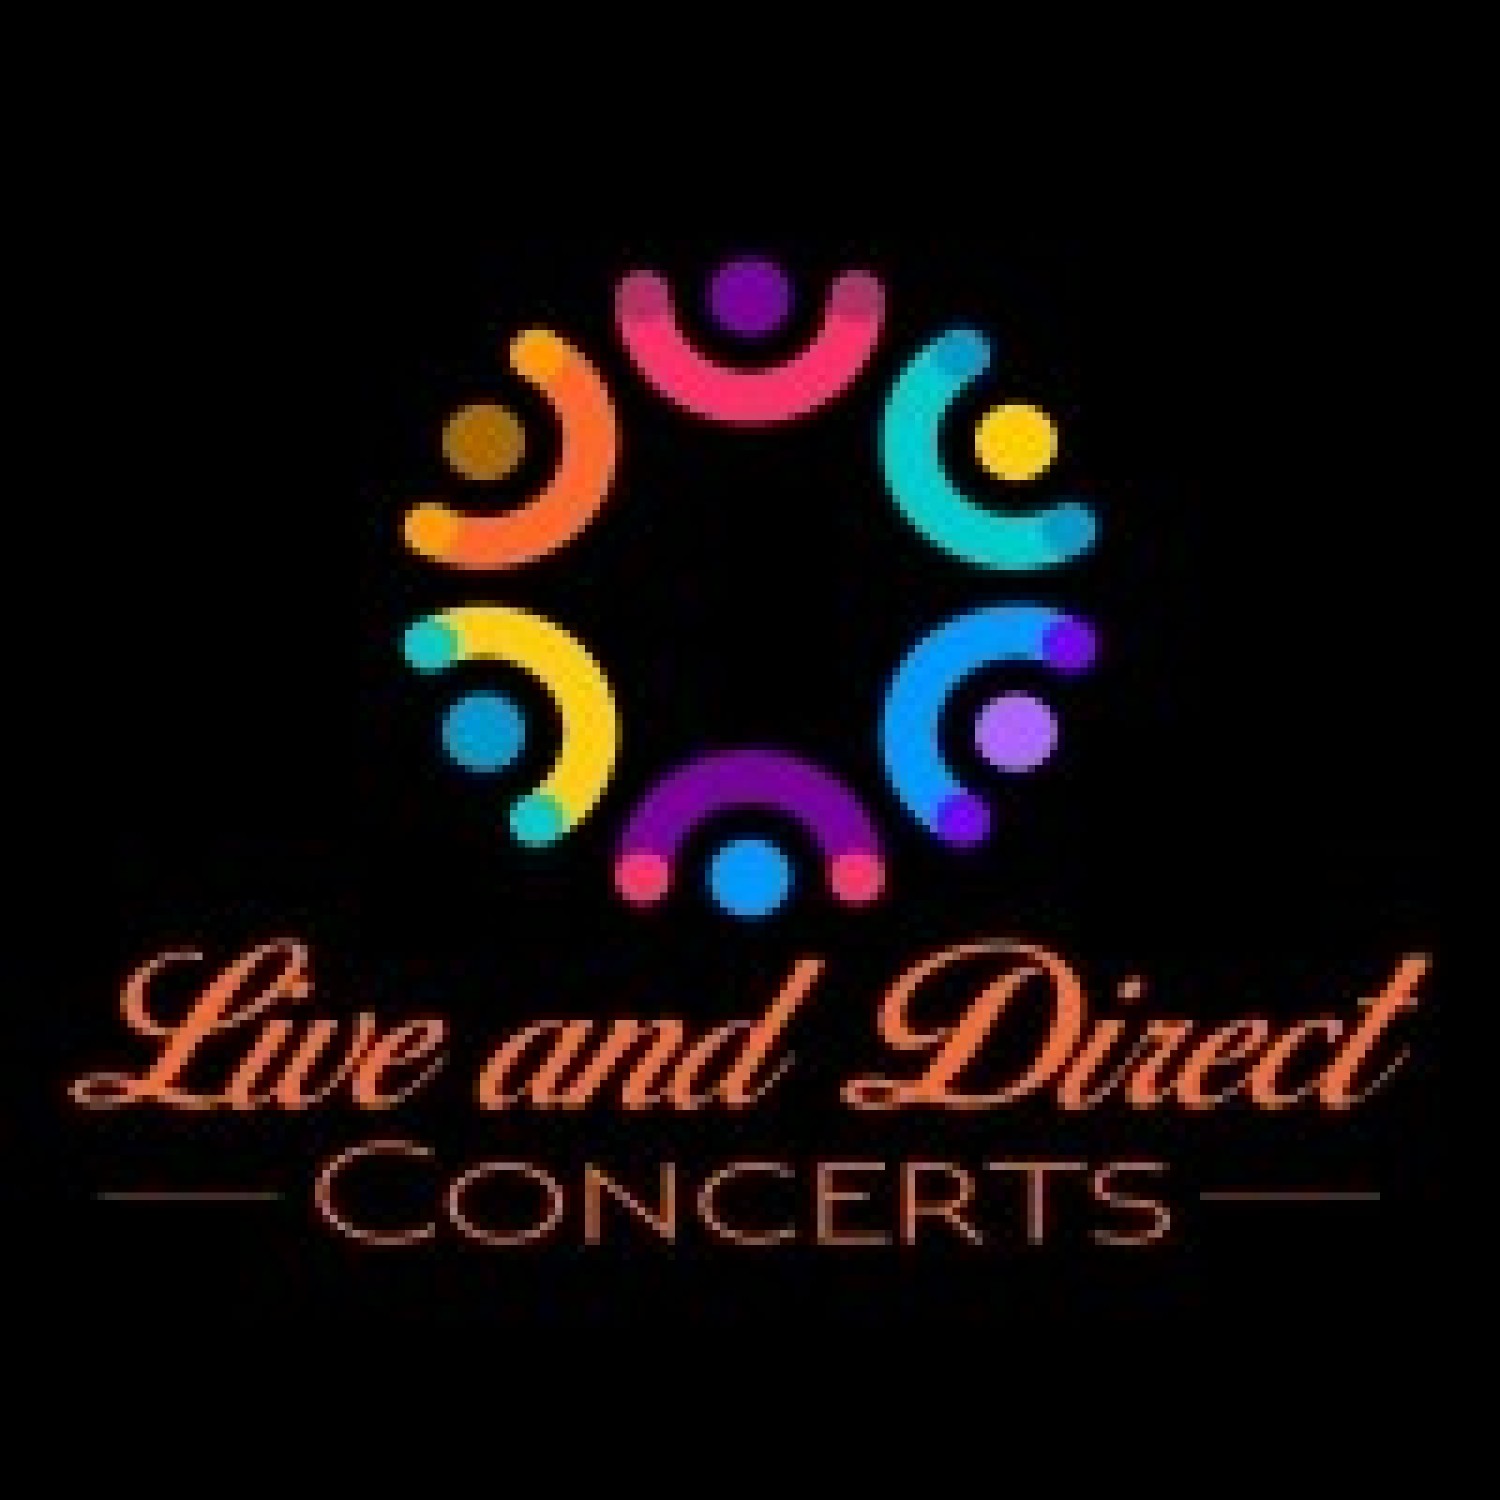 Live & Direct Concerts